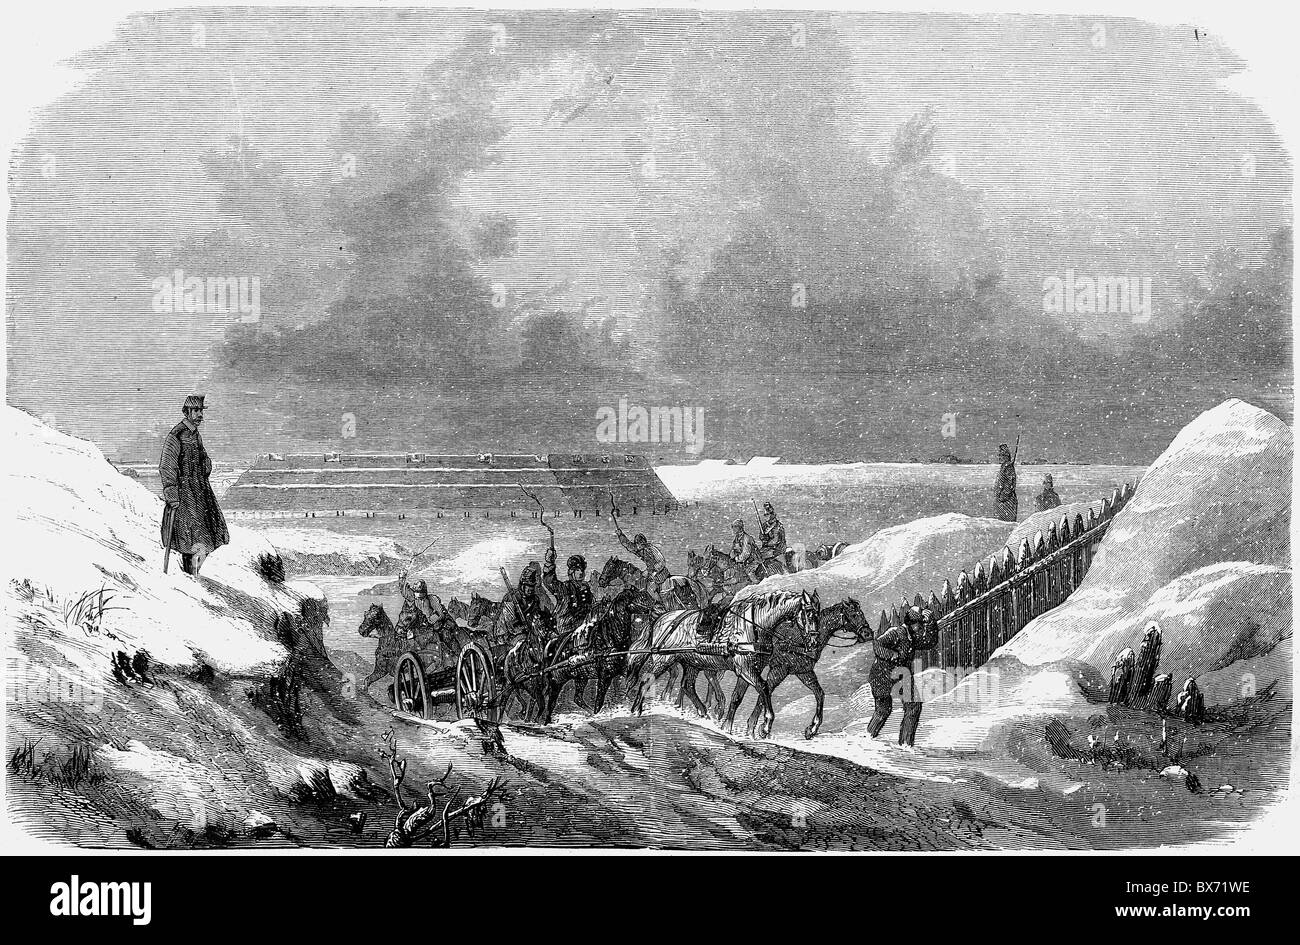 events, Second Schleswig War 1864, Austrian troops advancing at the Schlei near Missunde, mid February 1864, wood engraving after drawing by E. Wolperding,19th century, Denmark, Germany, Wars of German Unification, Austria, Austrians, soldiers, winter, horse and cart, redoubt, redoubts, fortress, historic, historical, people, Additional-Rights-Clearences-Not Available Stock Photo